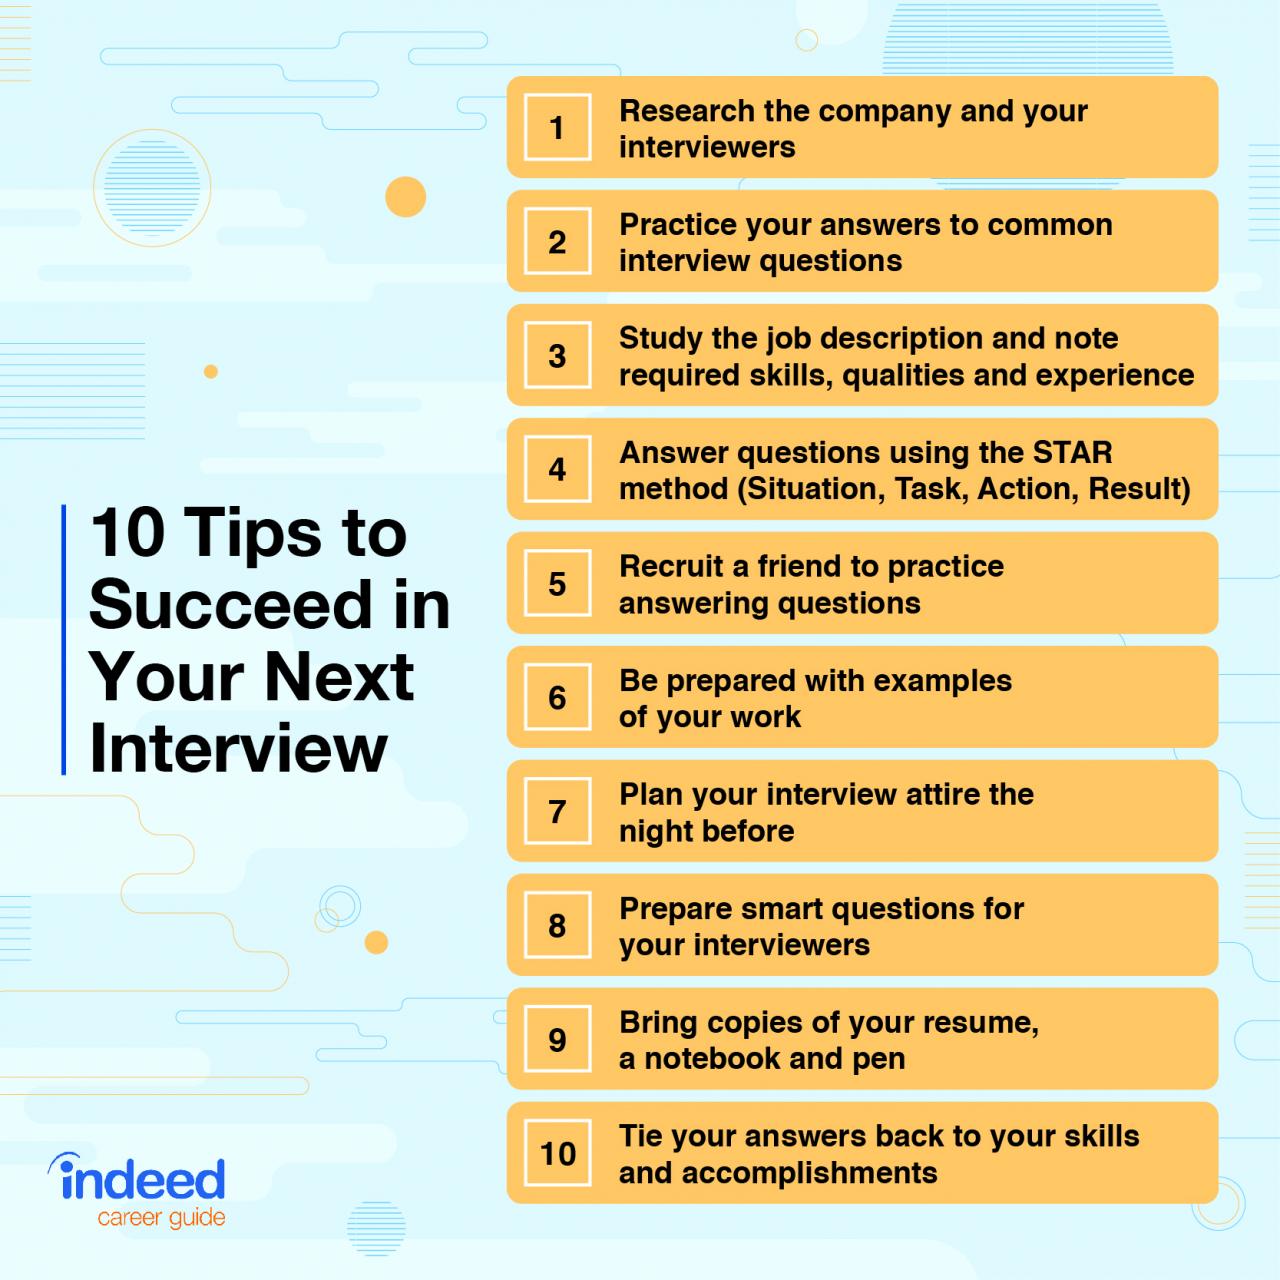 6 ways to prepare for an interview